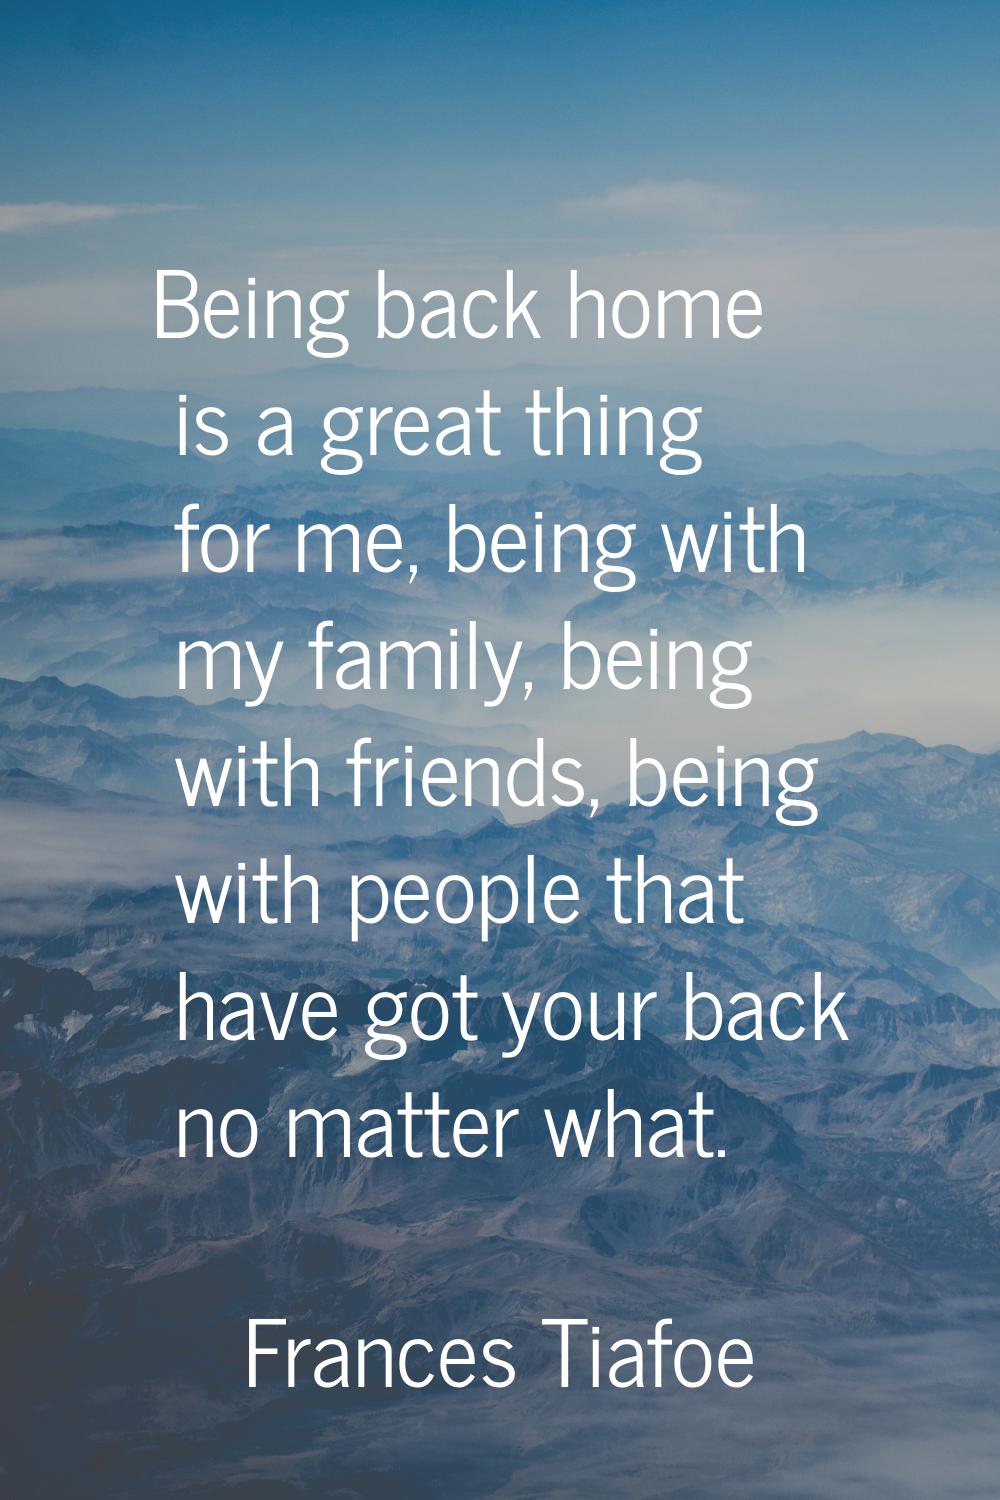 Being back home is a great thing for me, being with my family, being with friends, being with peopl